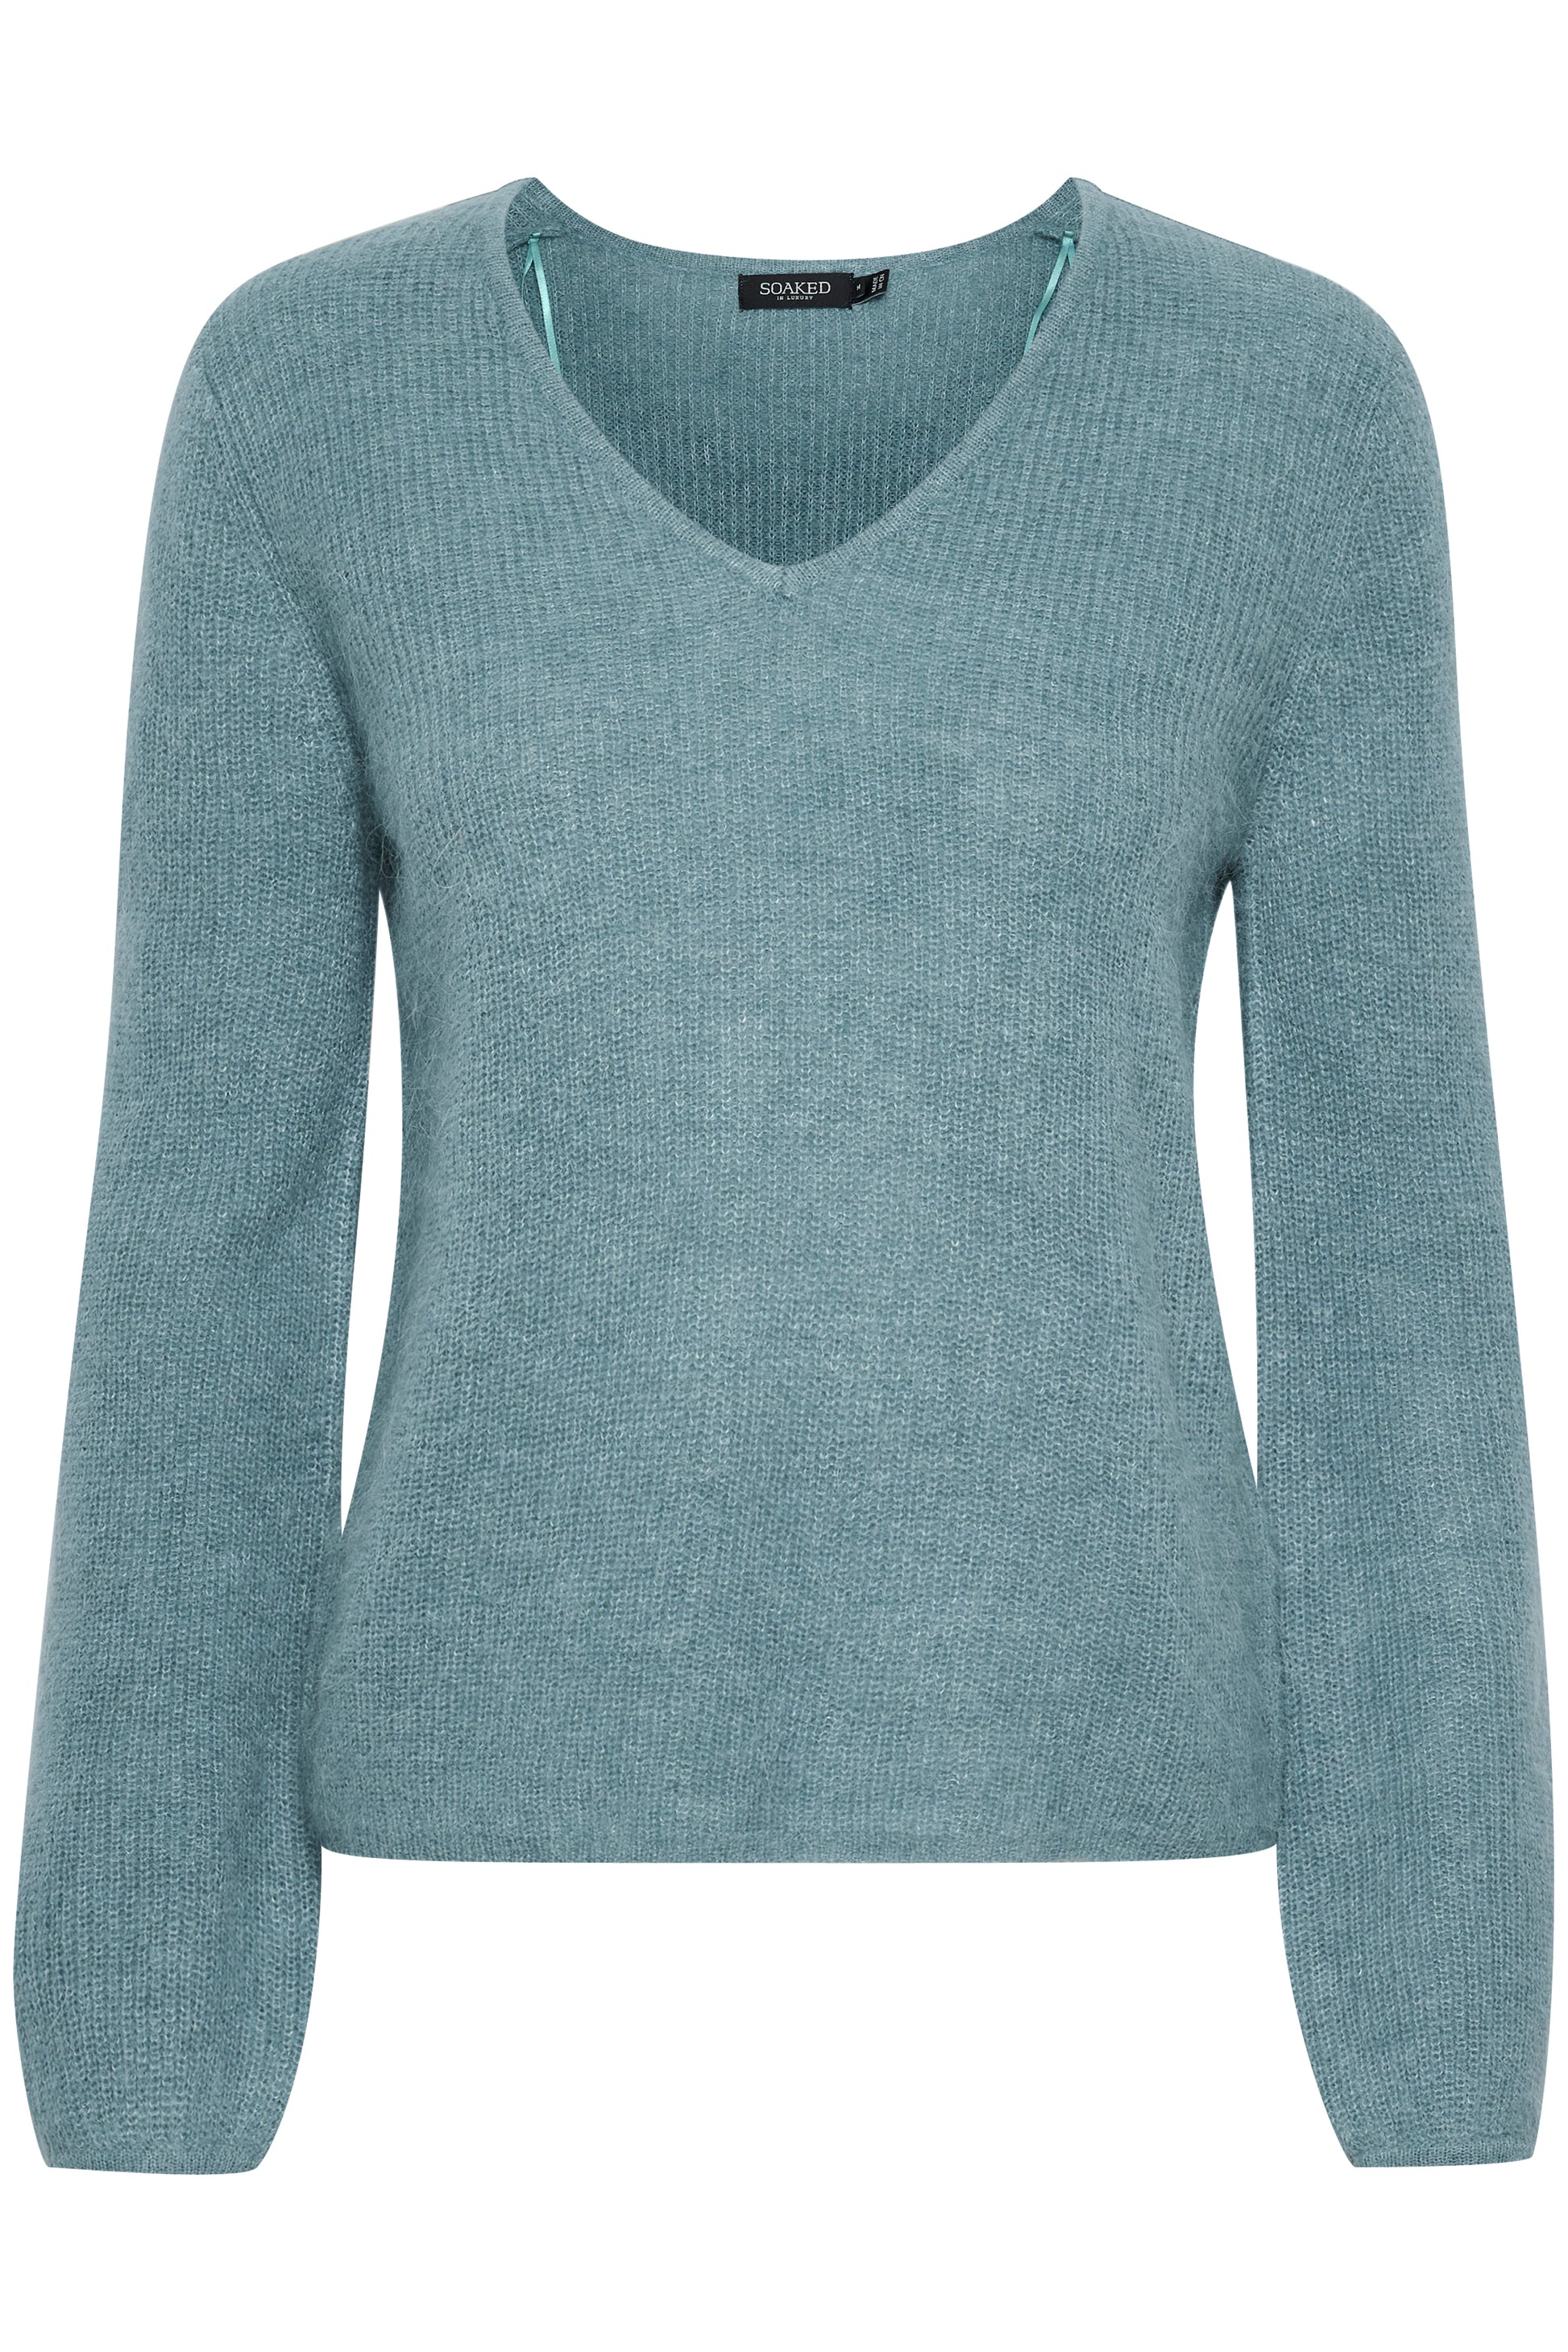 Soaked in Luxury Tuesday V-Neck Jumper LS Knit Citadel